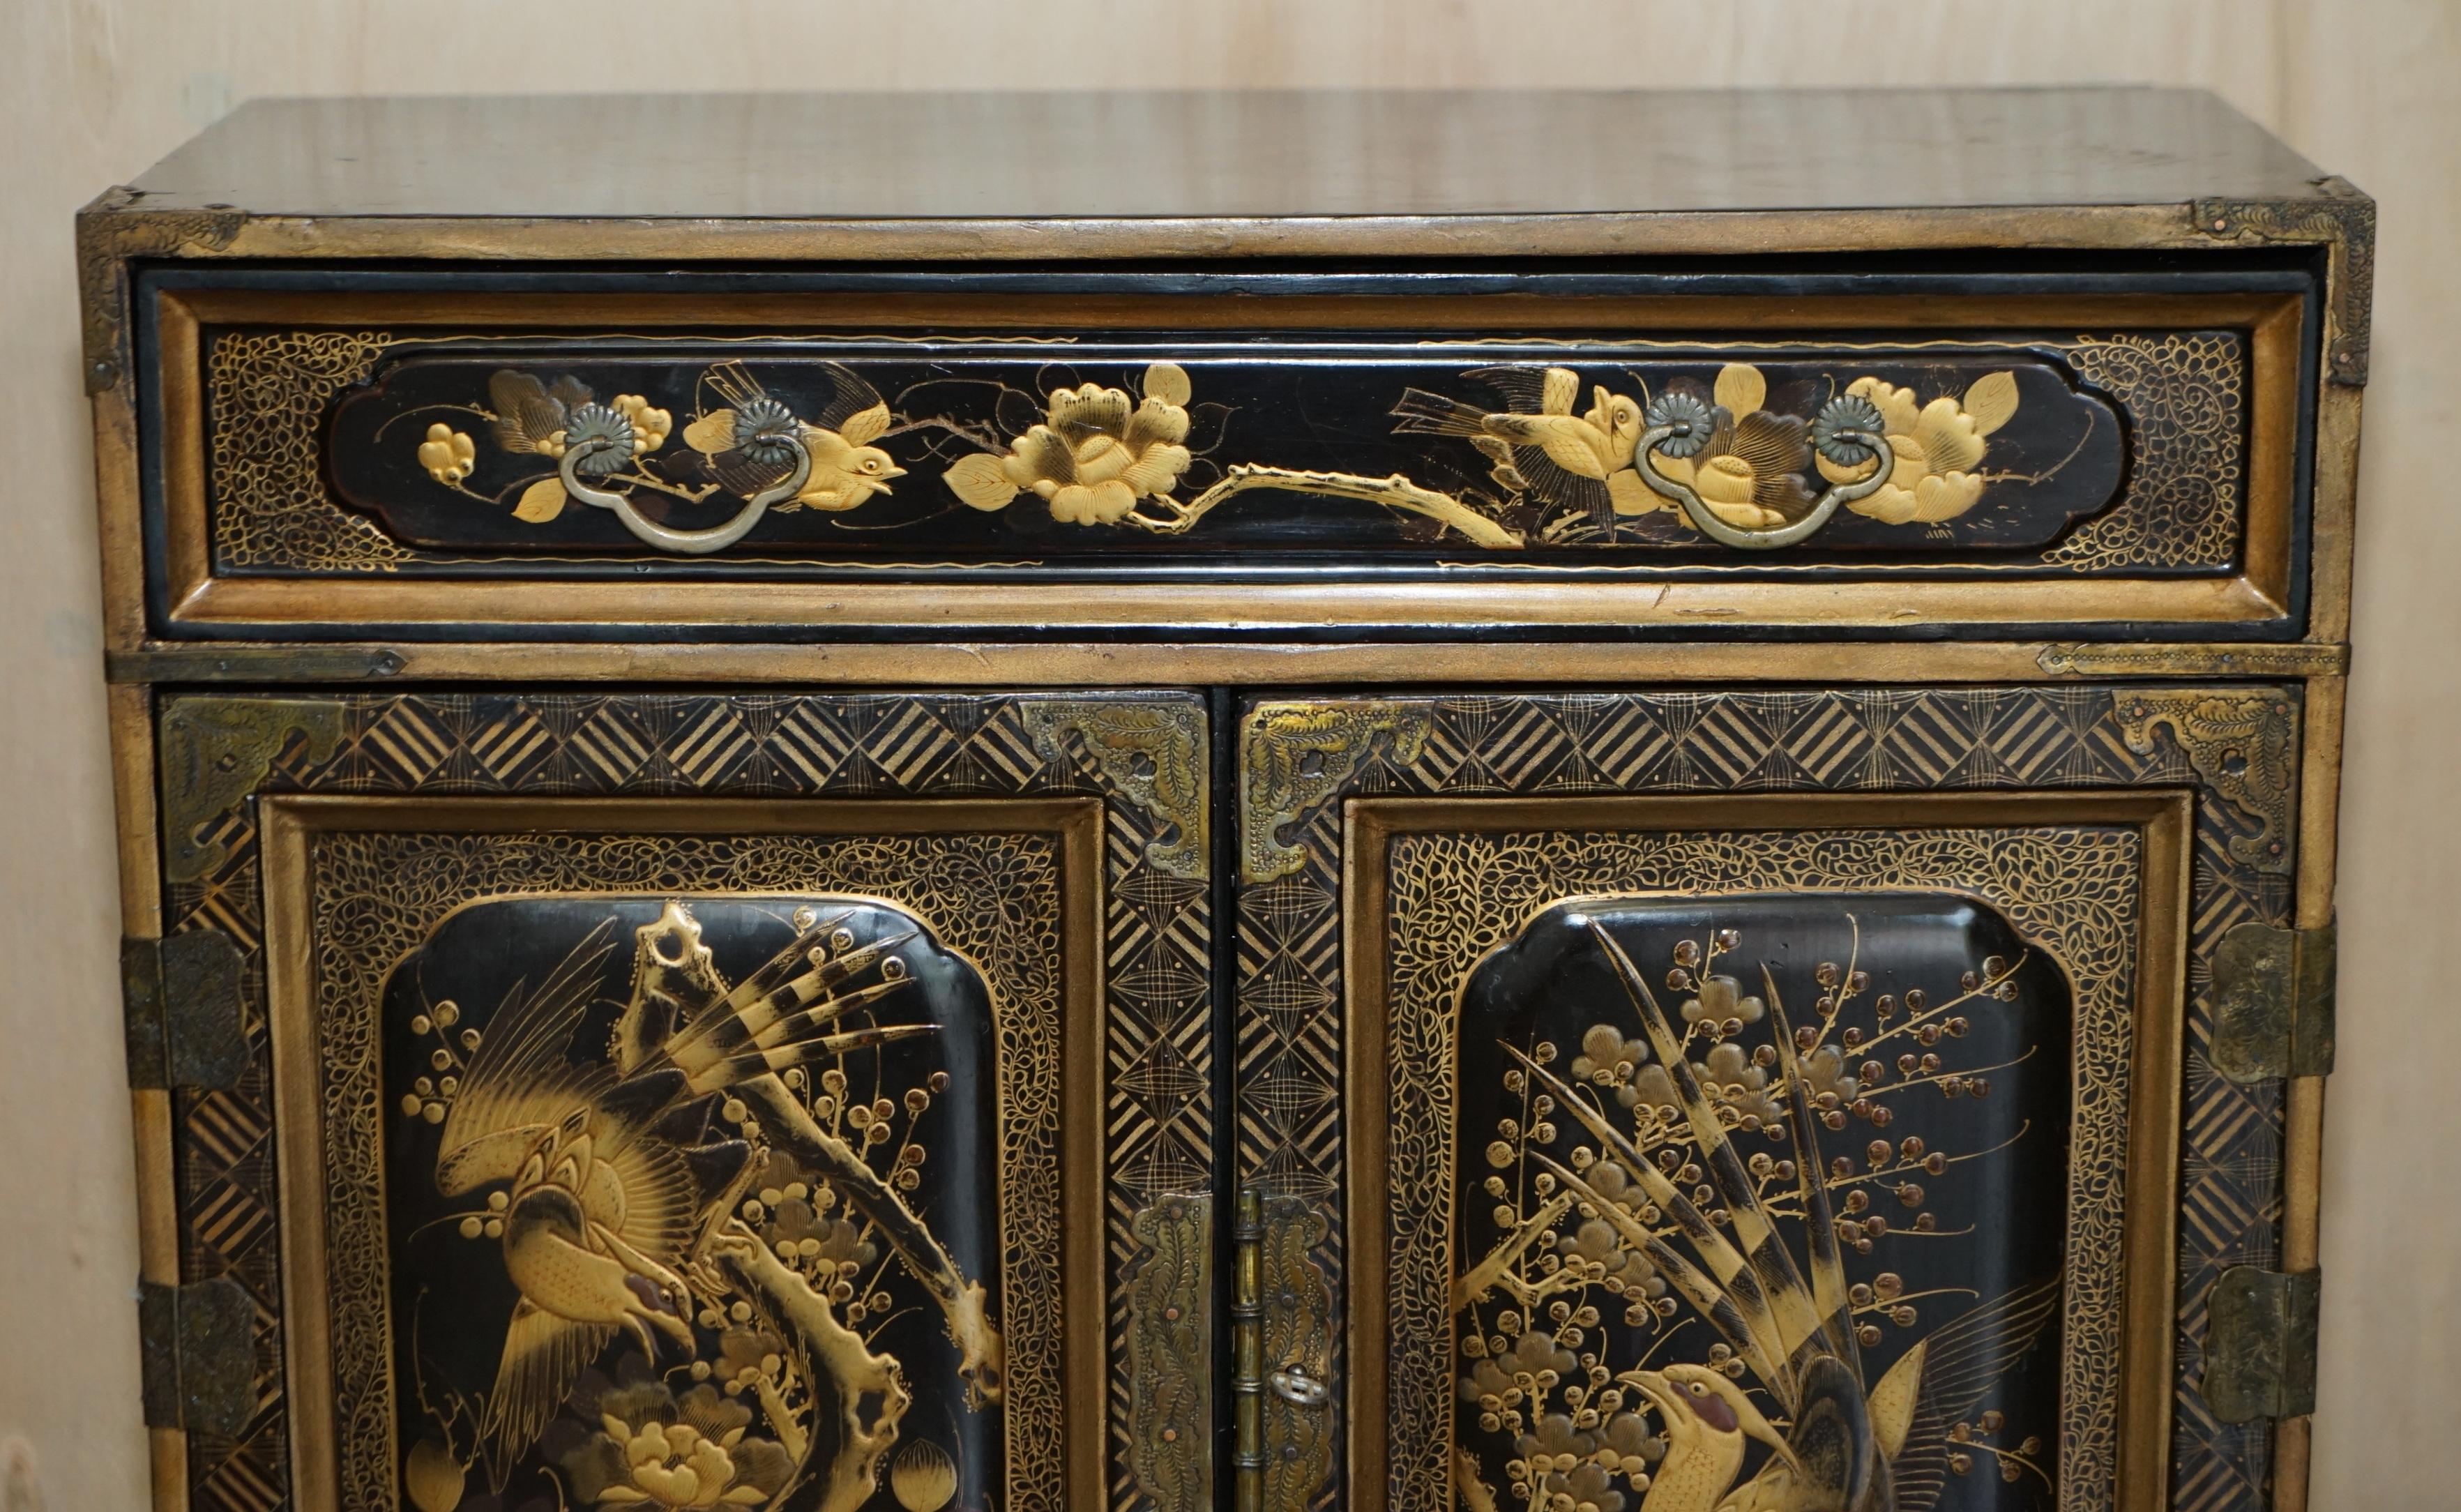 Early 20th Century Rare Oriental Chinese Export Antique Cabinet Lots of Drawers for Fine Teas